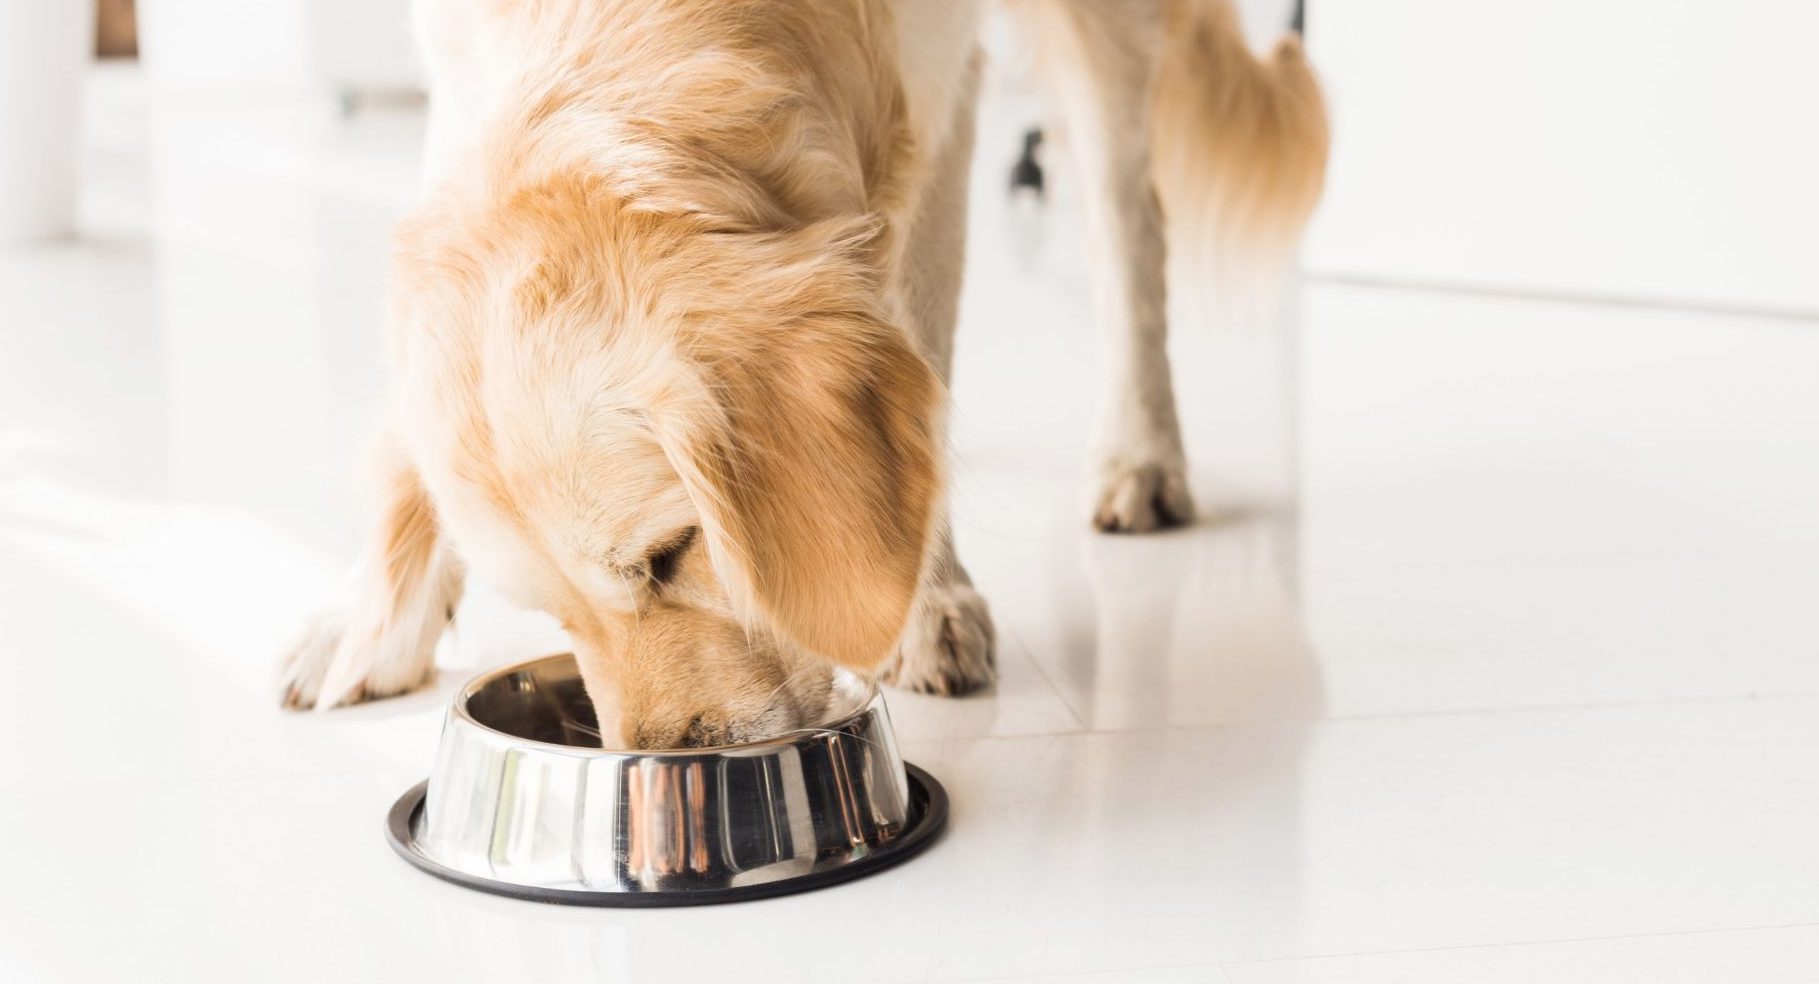 Global Pet Food Market Overview And Prospects